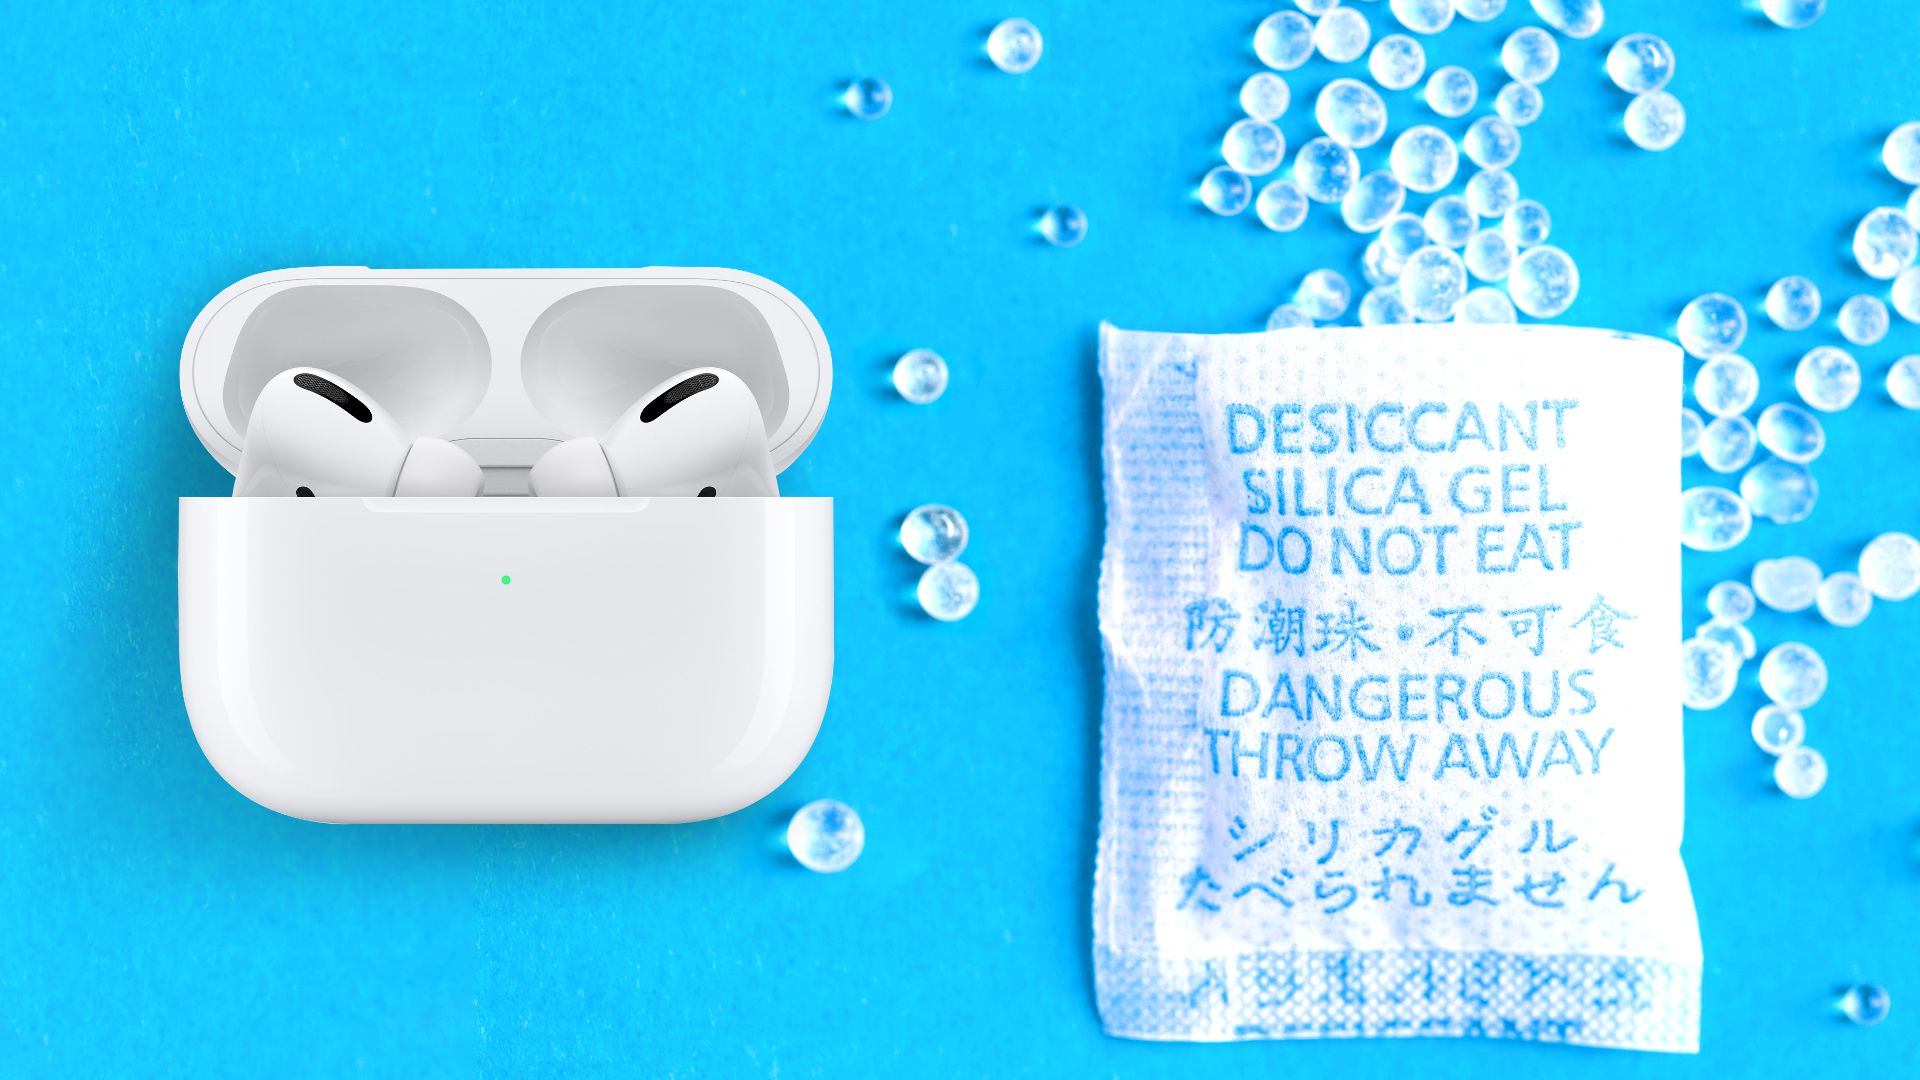 How to fix AirPods that feel in water using silica gel packets